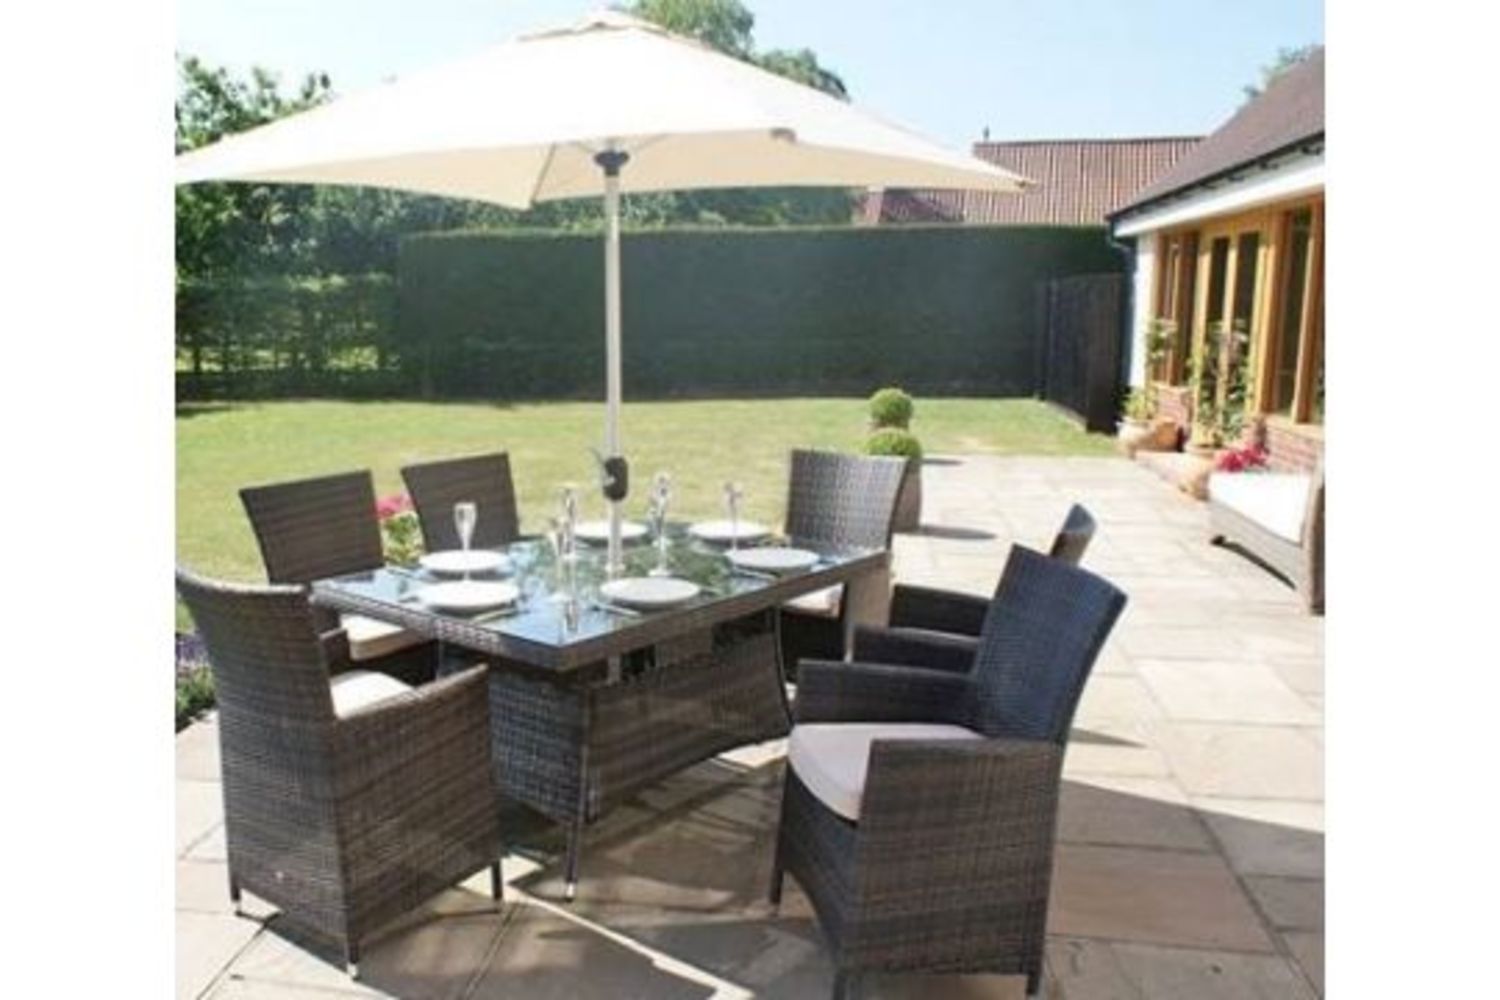 Brand New Rattan Garden Furniture: Including Dining Sets, Sofa Sets, Sun Loungers and More